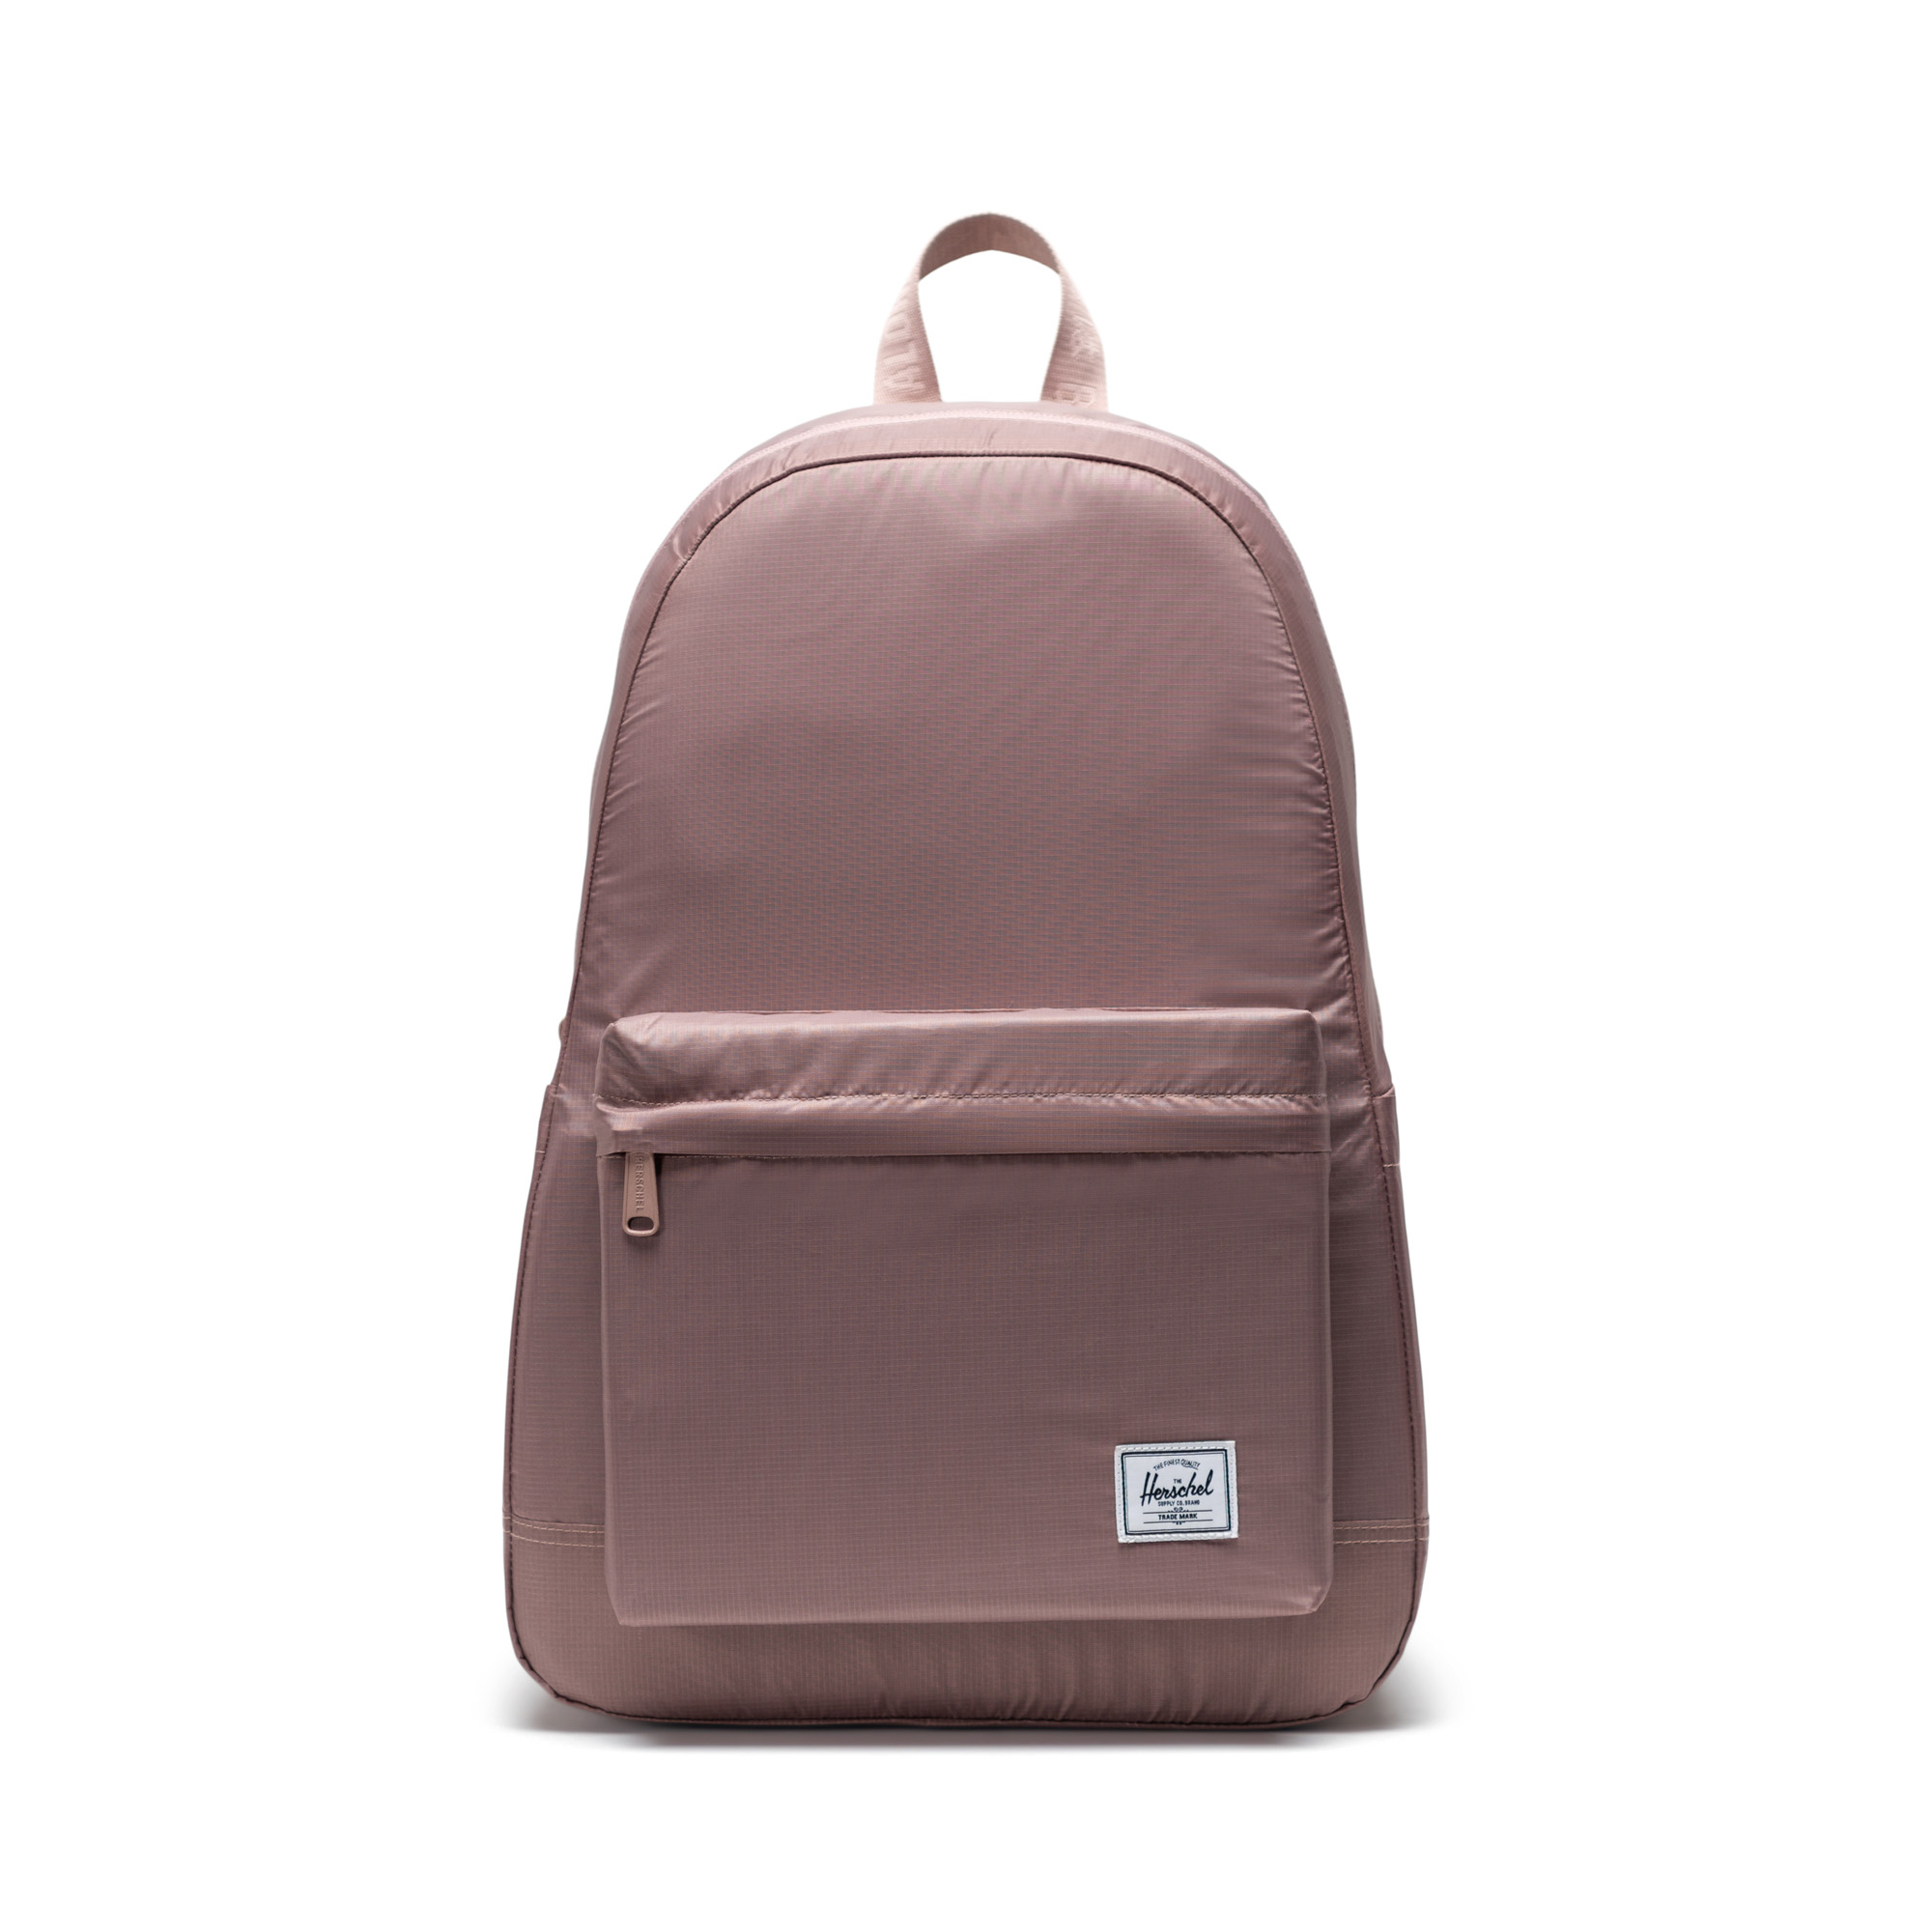 Rome Packable Daypack | Herschel Supply Company